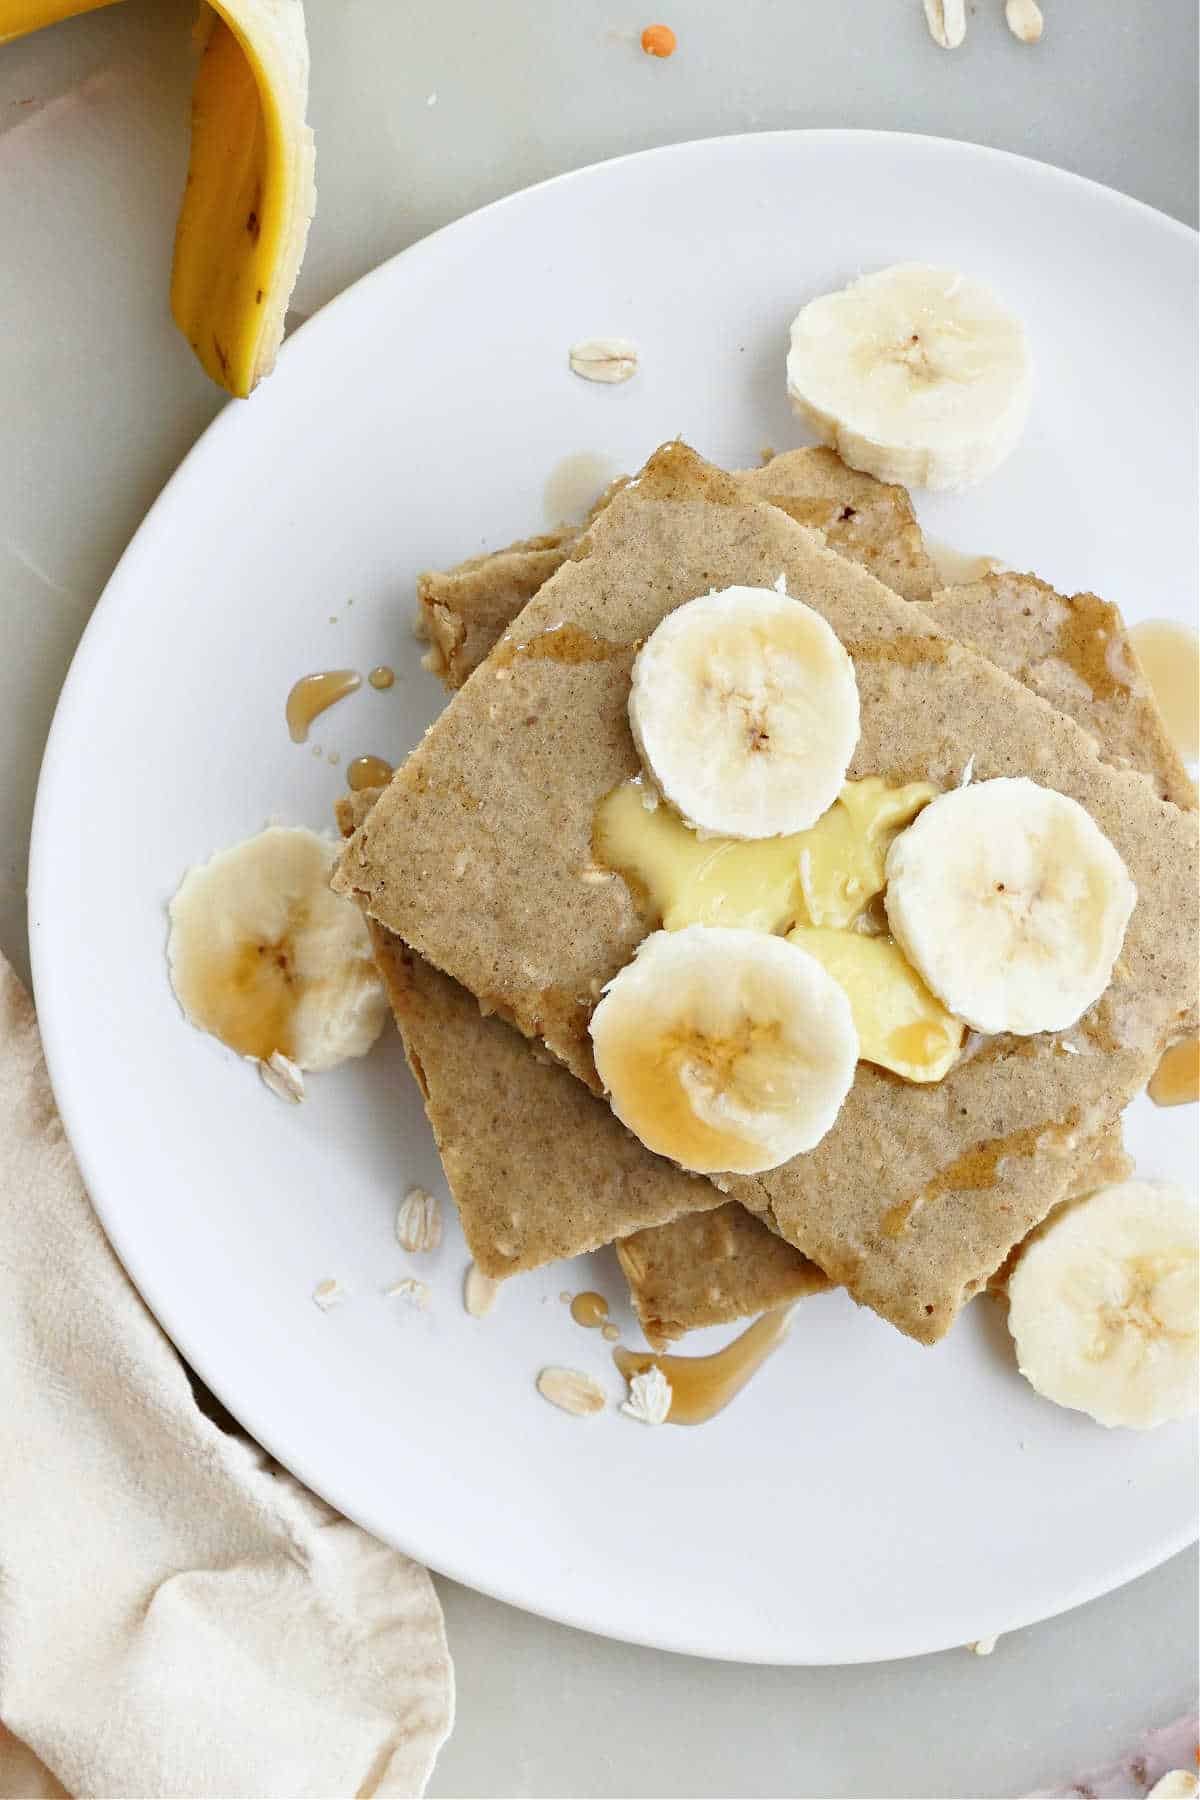 Baked banana pancakes sliced into squares on a white plate with sliced bananas.